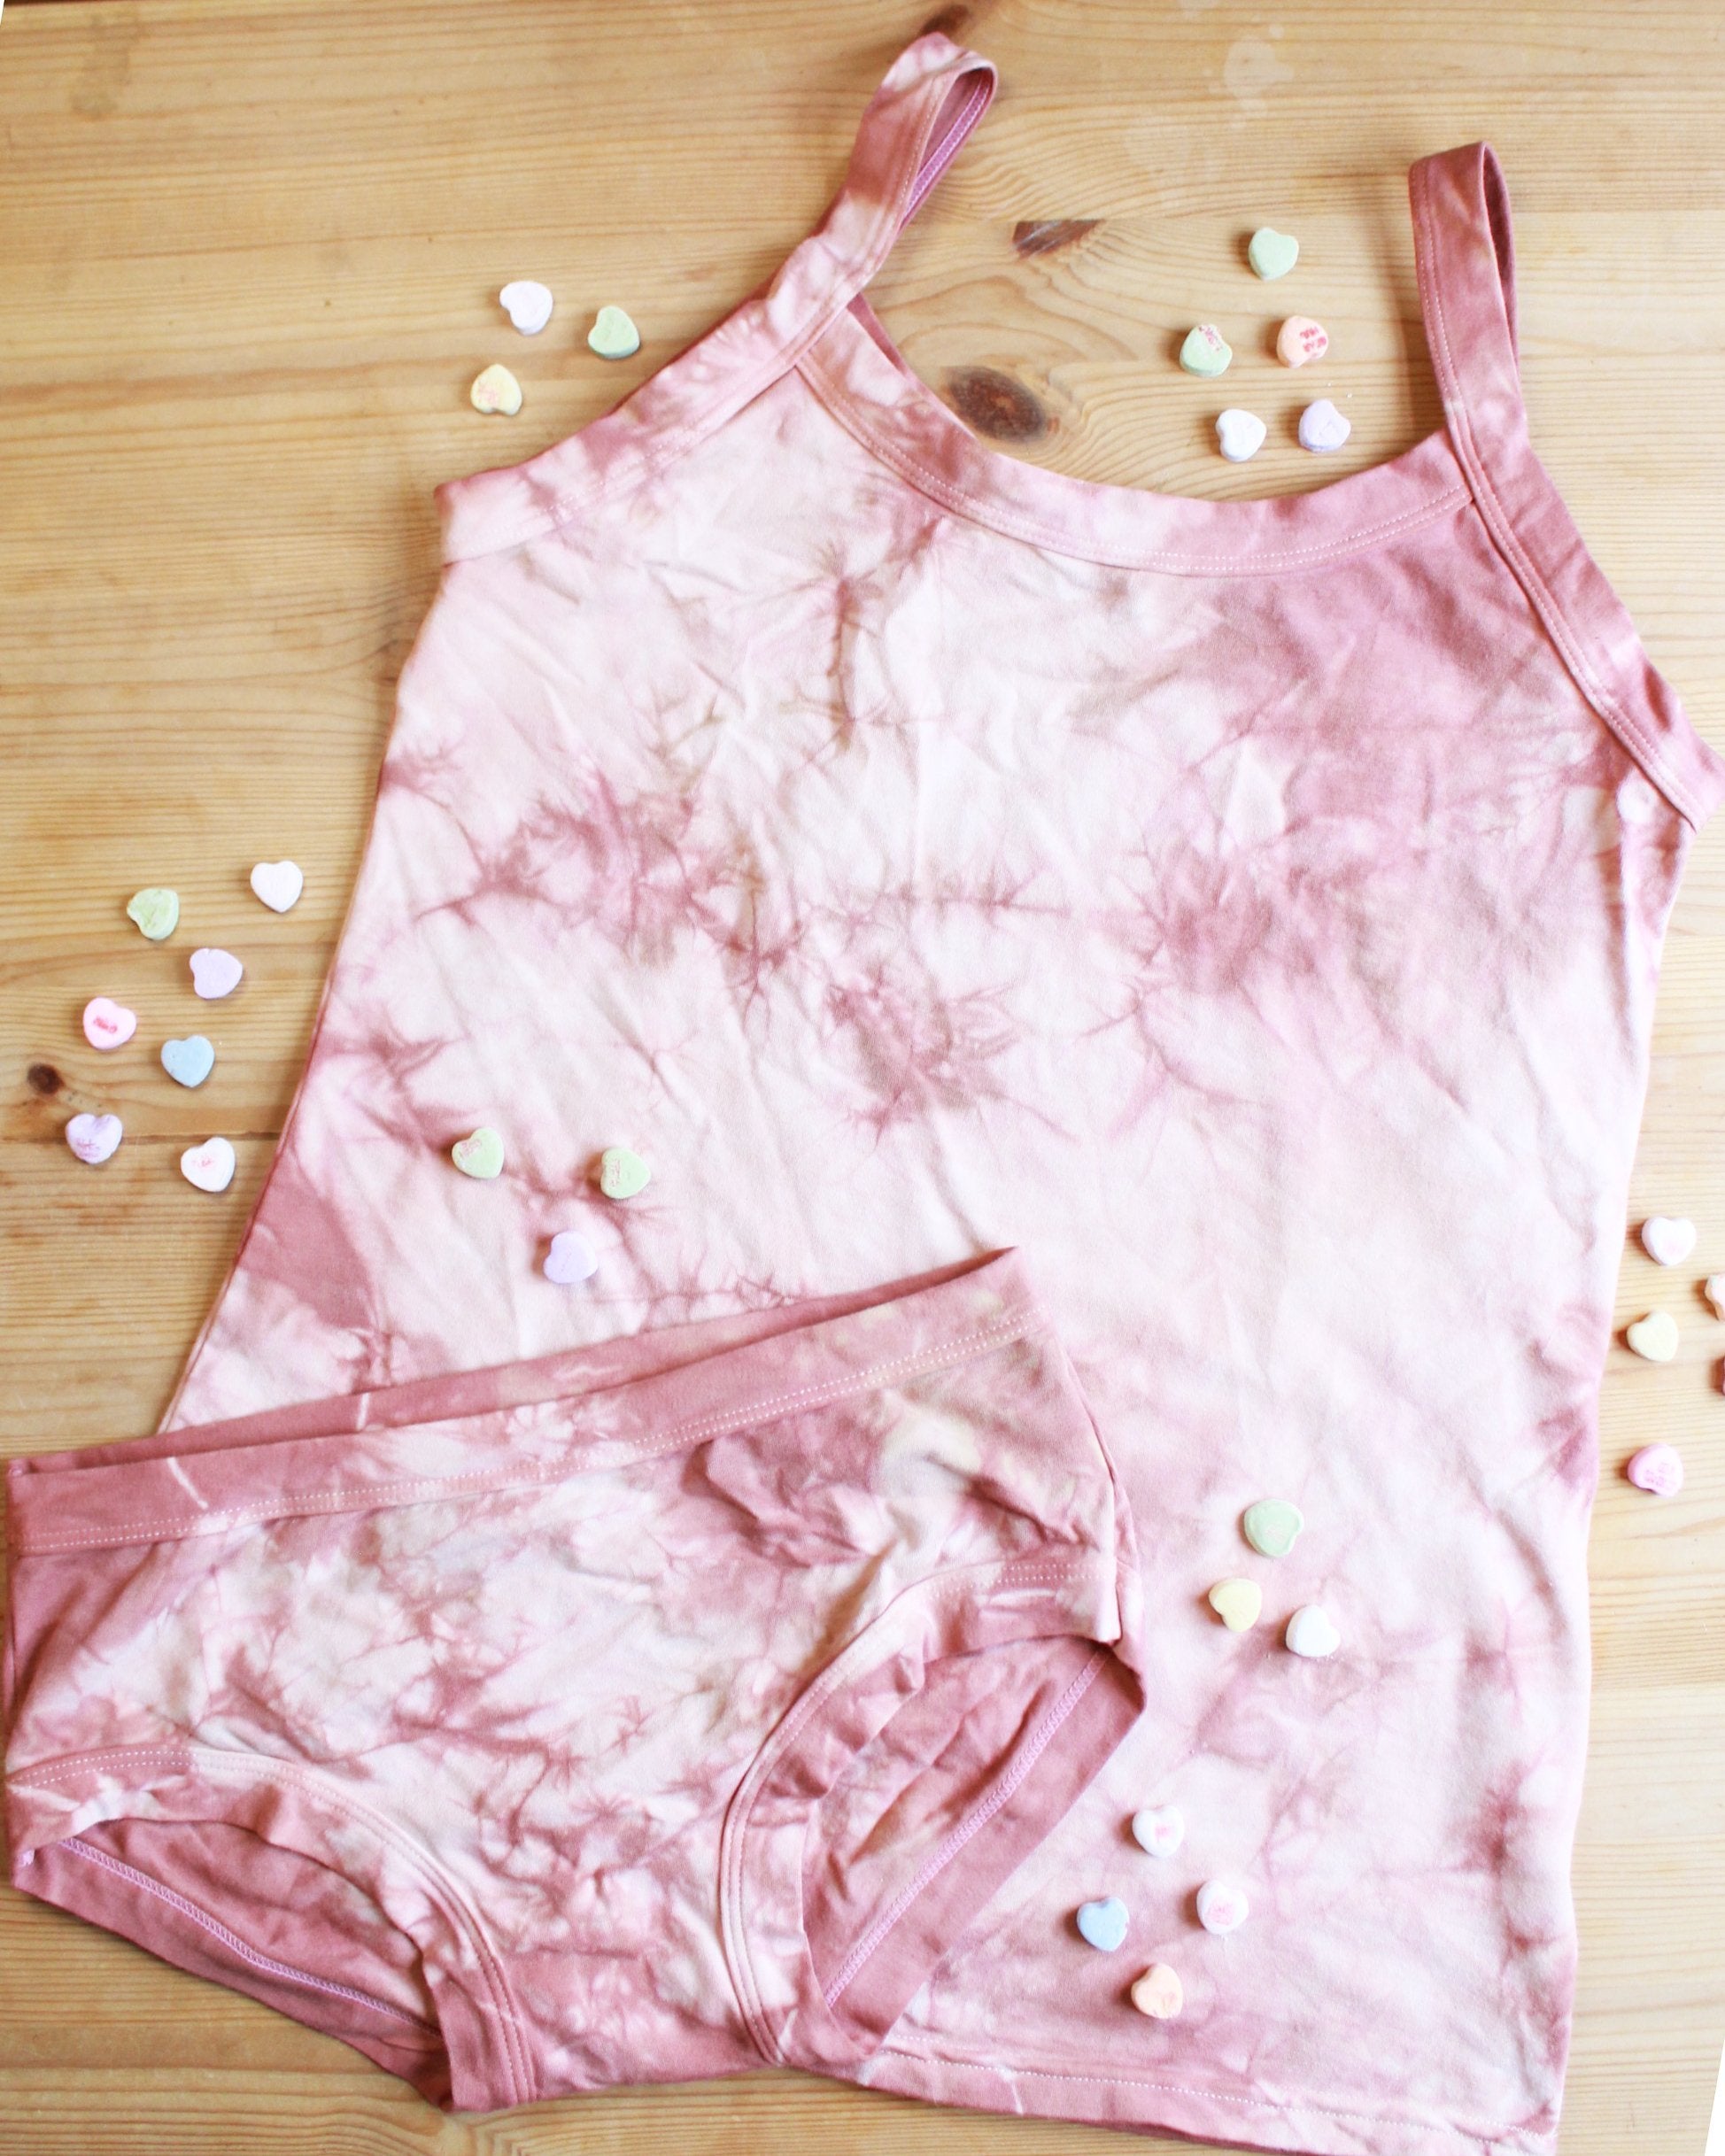 Flat lay of Thunderpants organic cotton Women’s Hipster style underwear and Camisole in limited edition hand dye pink tie dye.